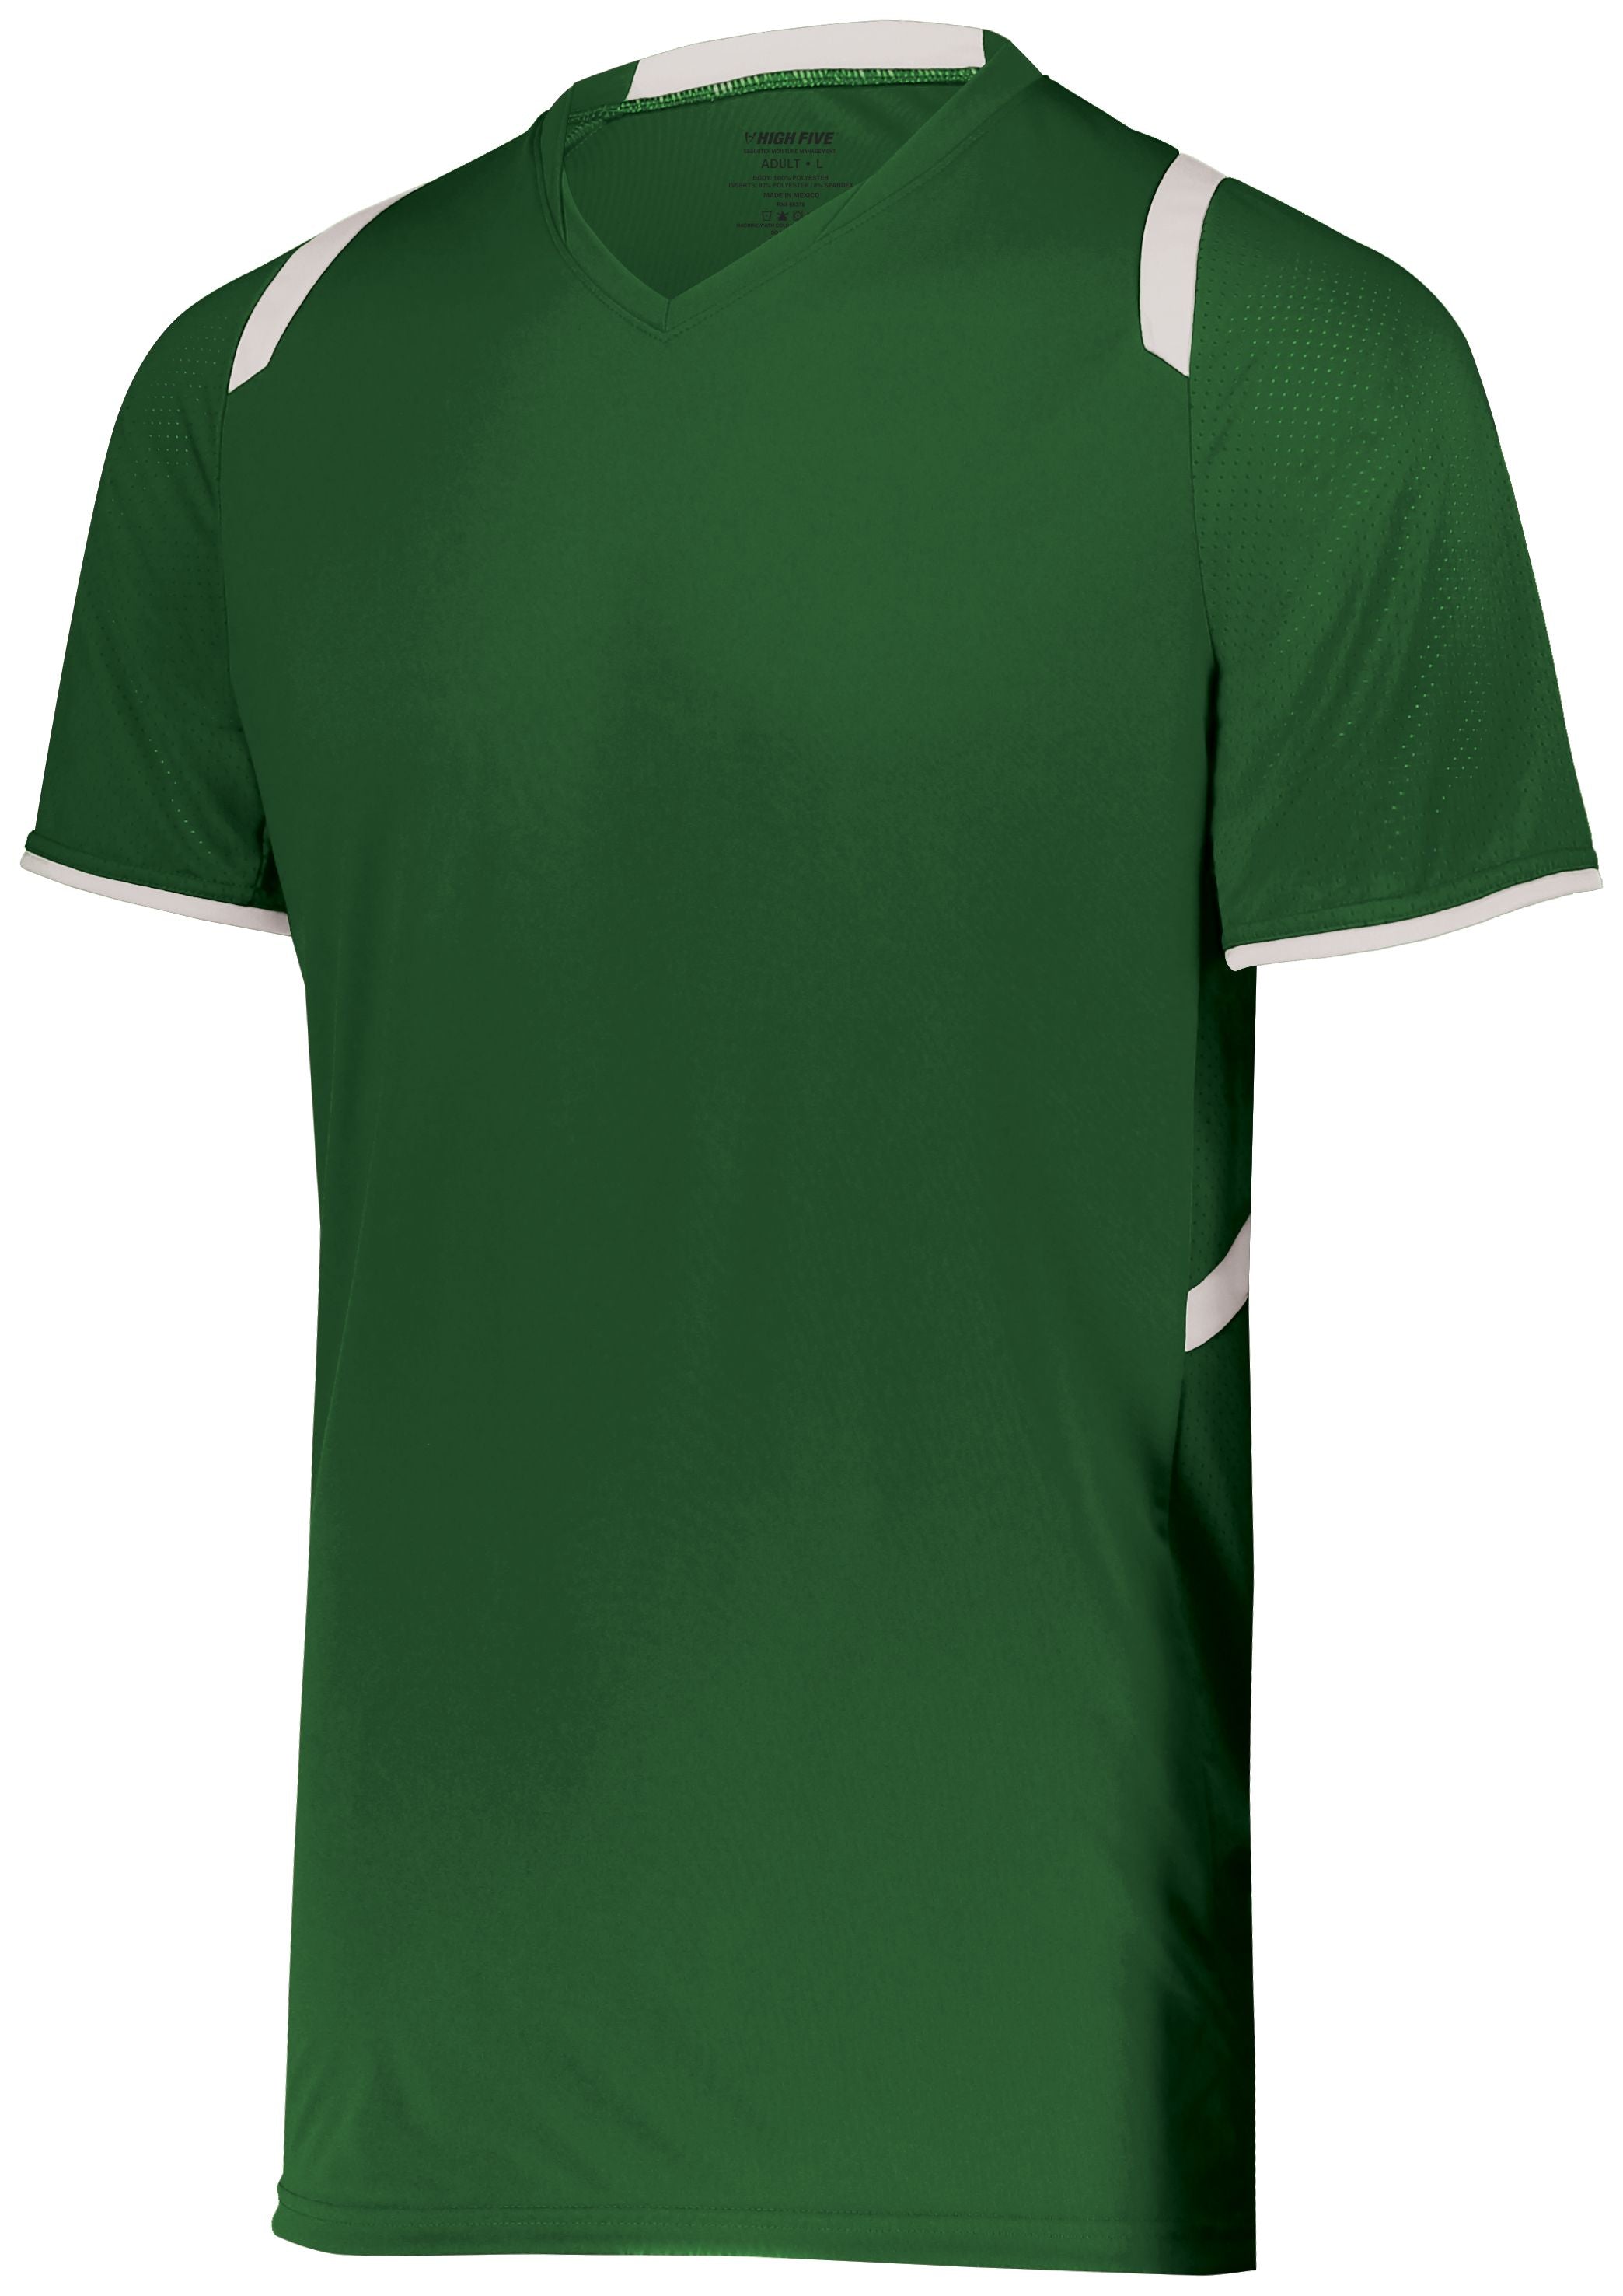 High 5 Youth Millennium Soccer Jersey in Forest/White  -Part of the Youth, Youth-Jersey, High5-Products, Soccer, Shirts, All-Sports-1 product lines at KanaleyCreations.com